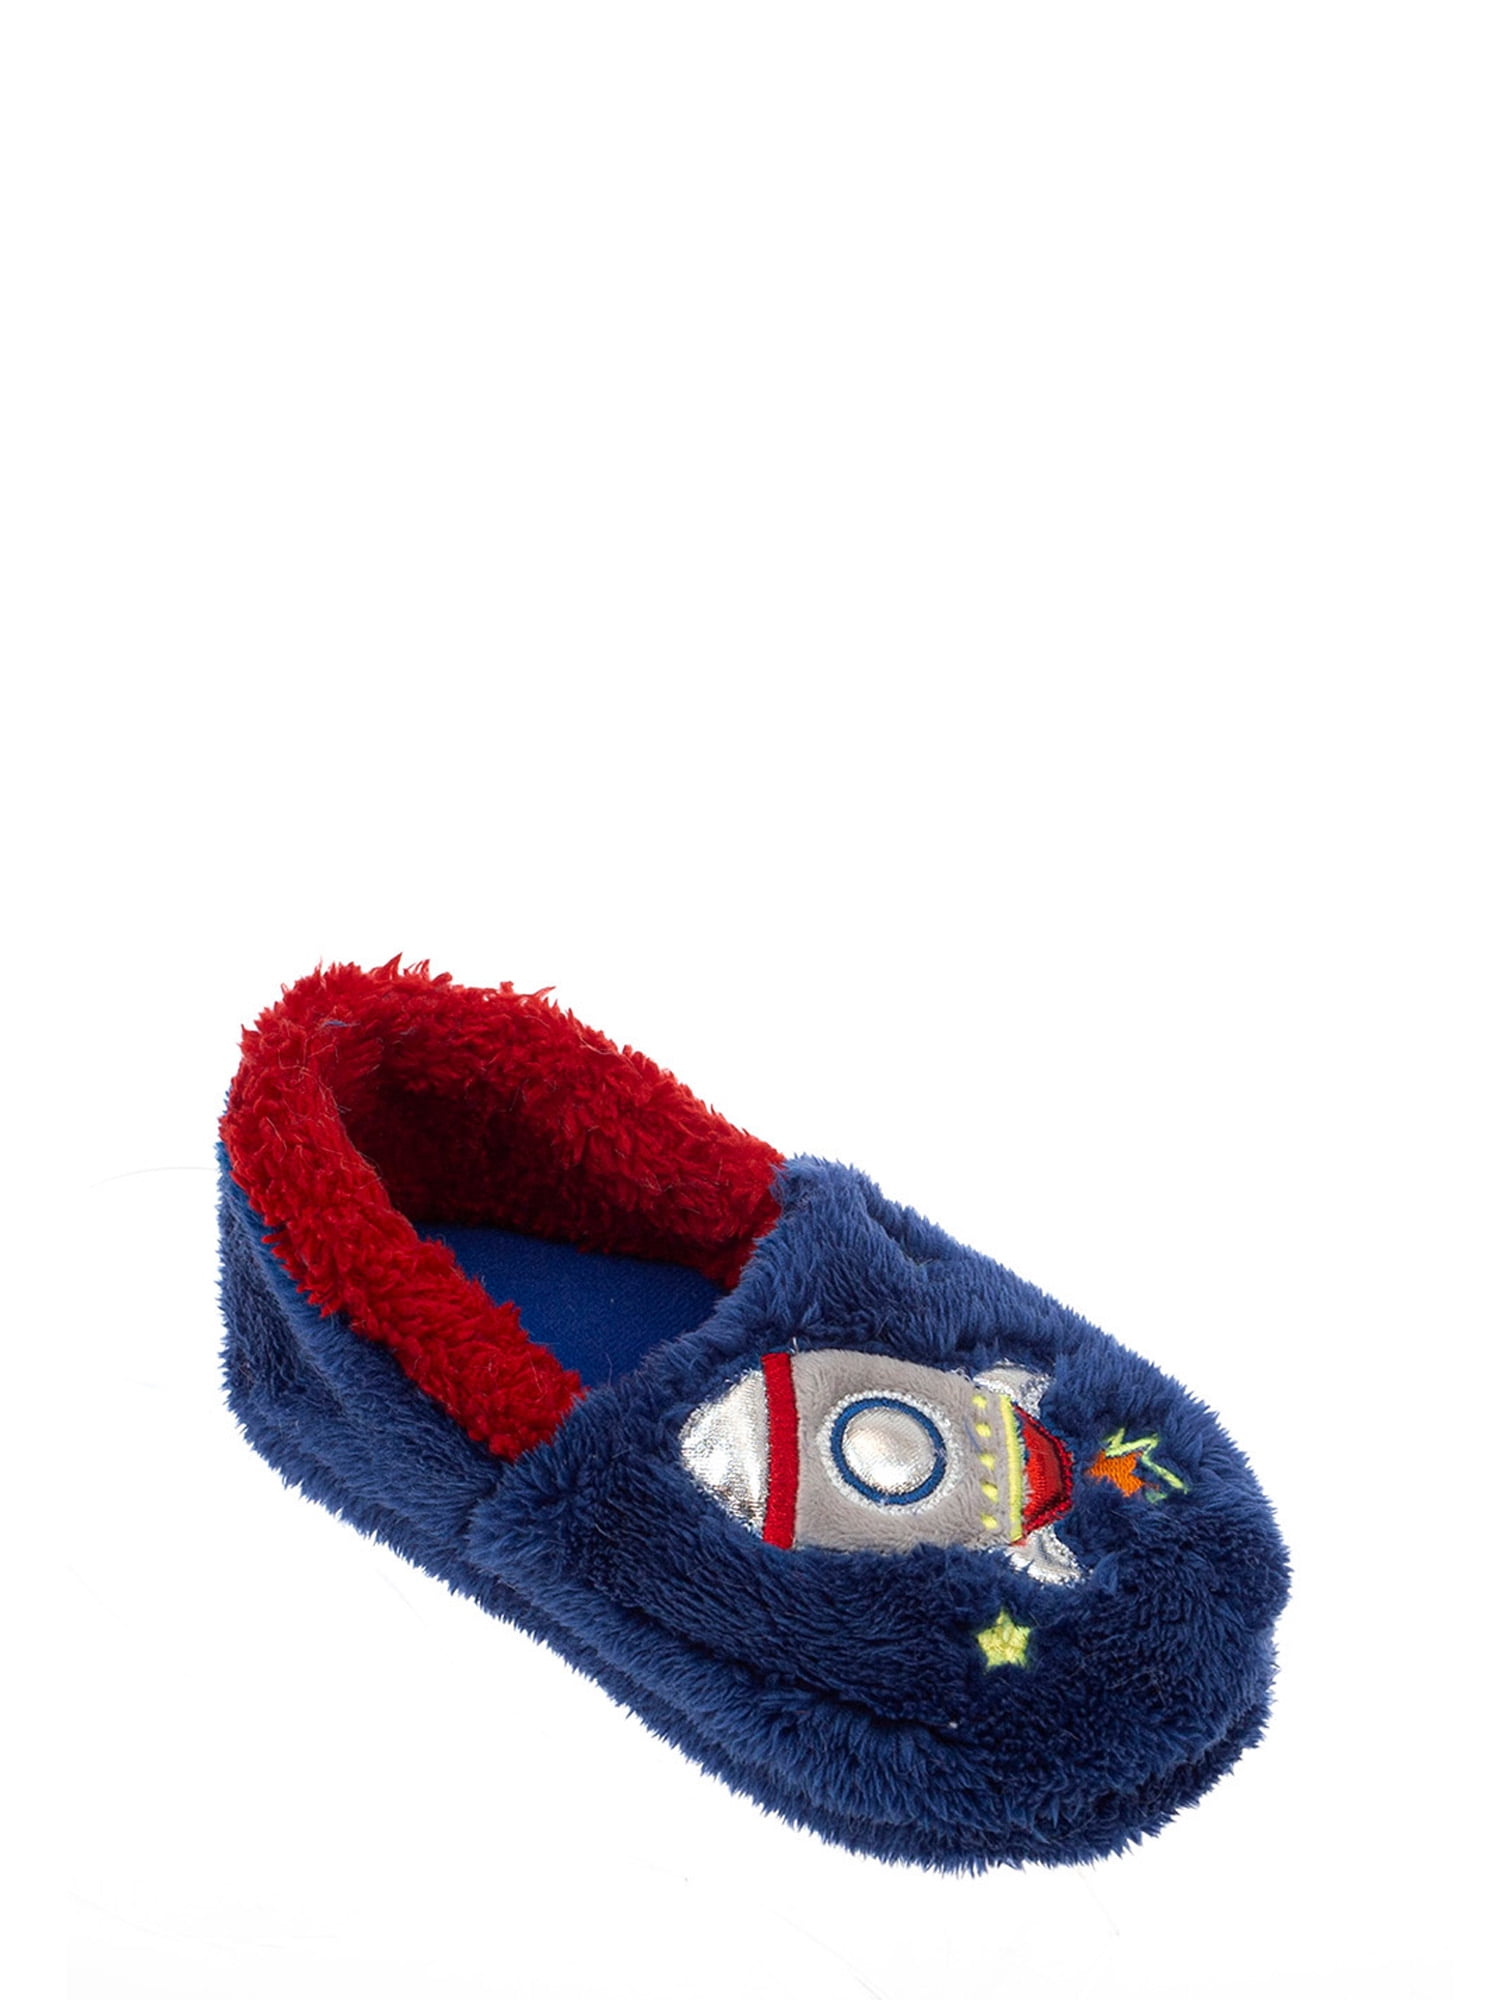 mens slippers moccasin style